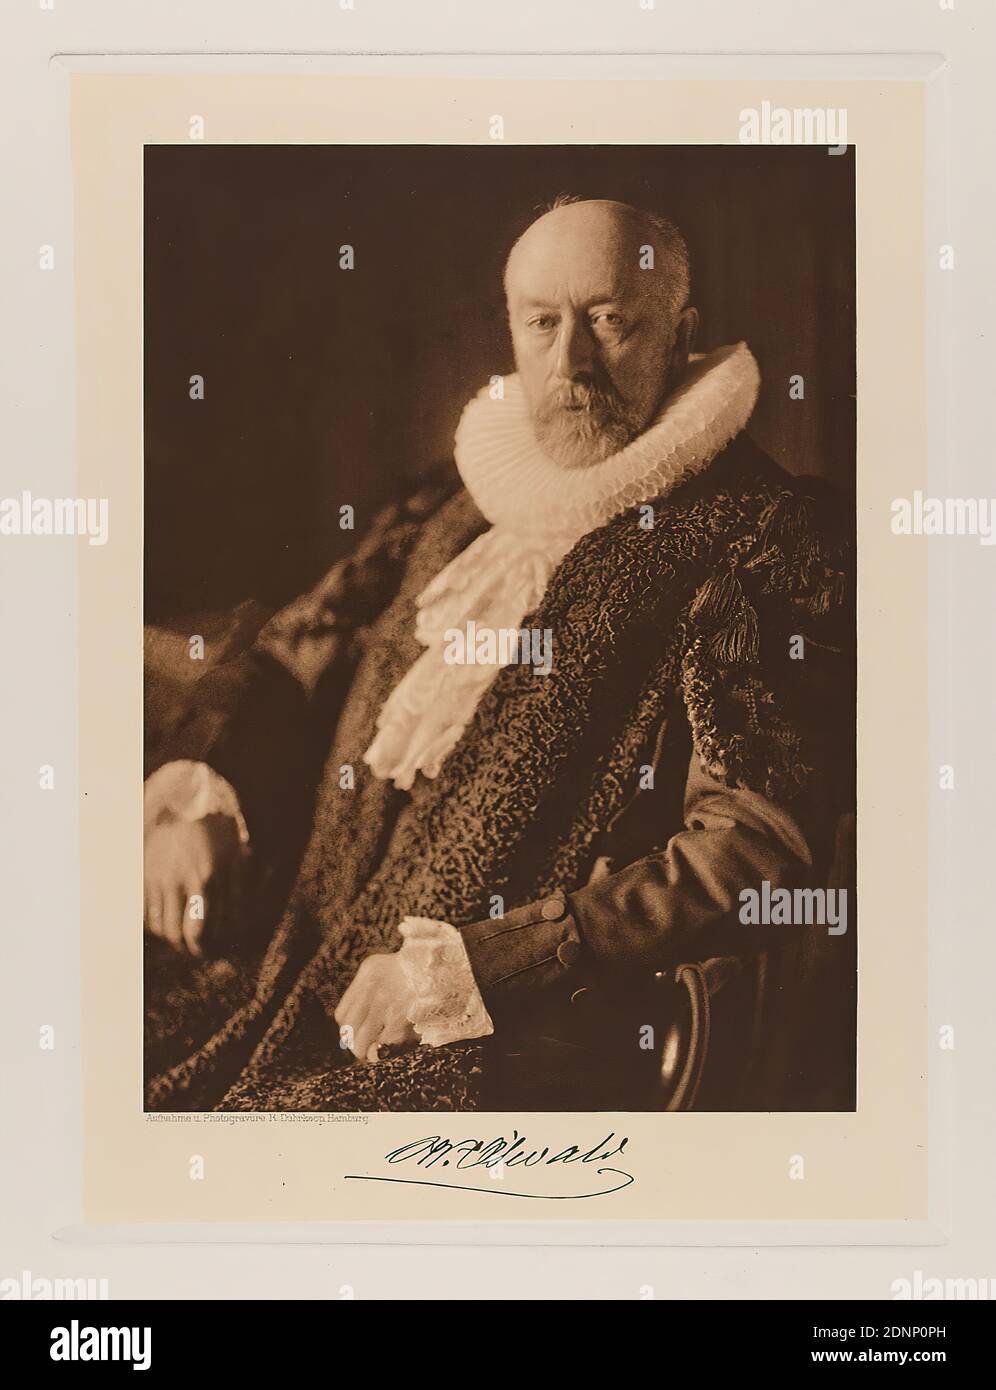 Rudolph Dührkoop, Senator W. H. O'Swald from the portfolio Hamburgische Männer und Frauen am Anfang des XX. Century, Staatliche Landesbildstelle Hamburg, Collection on the History of Photography, paper, heliogravure, picture size: Height: 21,00 cm; Width: 15,60 cm, signed: recto below the picture: Exposed signature of the sitter, inscribed: recto: engraved on printing plate, below the picture: photograph and photogravure R. Dührkoop, Hamburg, top right in the corner in lead: 6, stamp: recto: handwritten addition: Inv. no. and reference to repro, portrait photography, portrait, en face Stock Photo